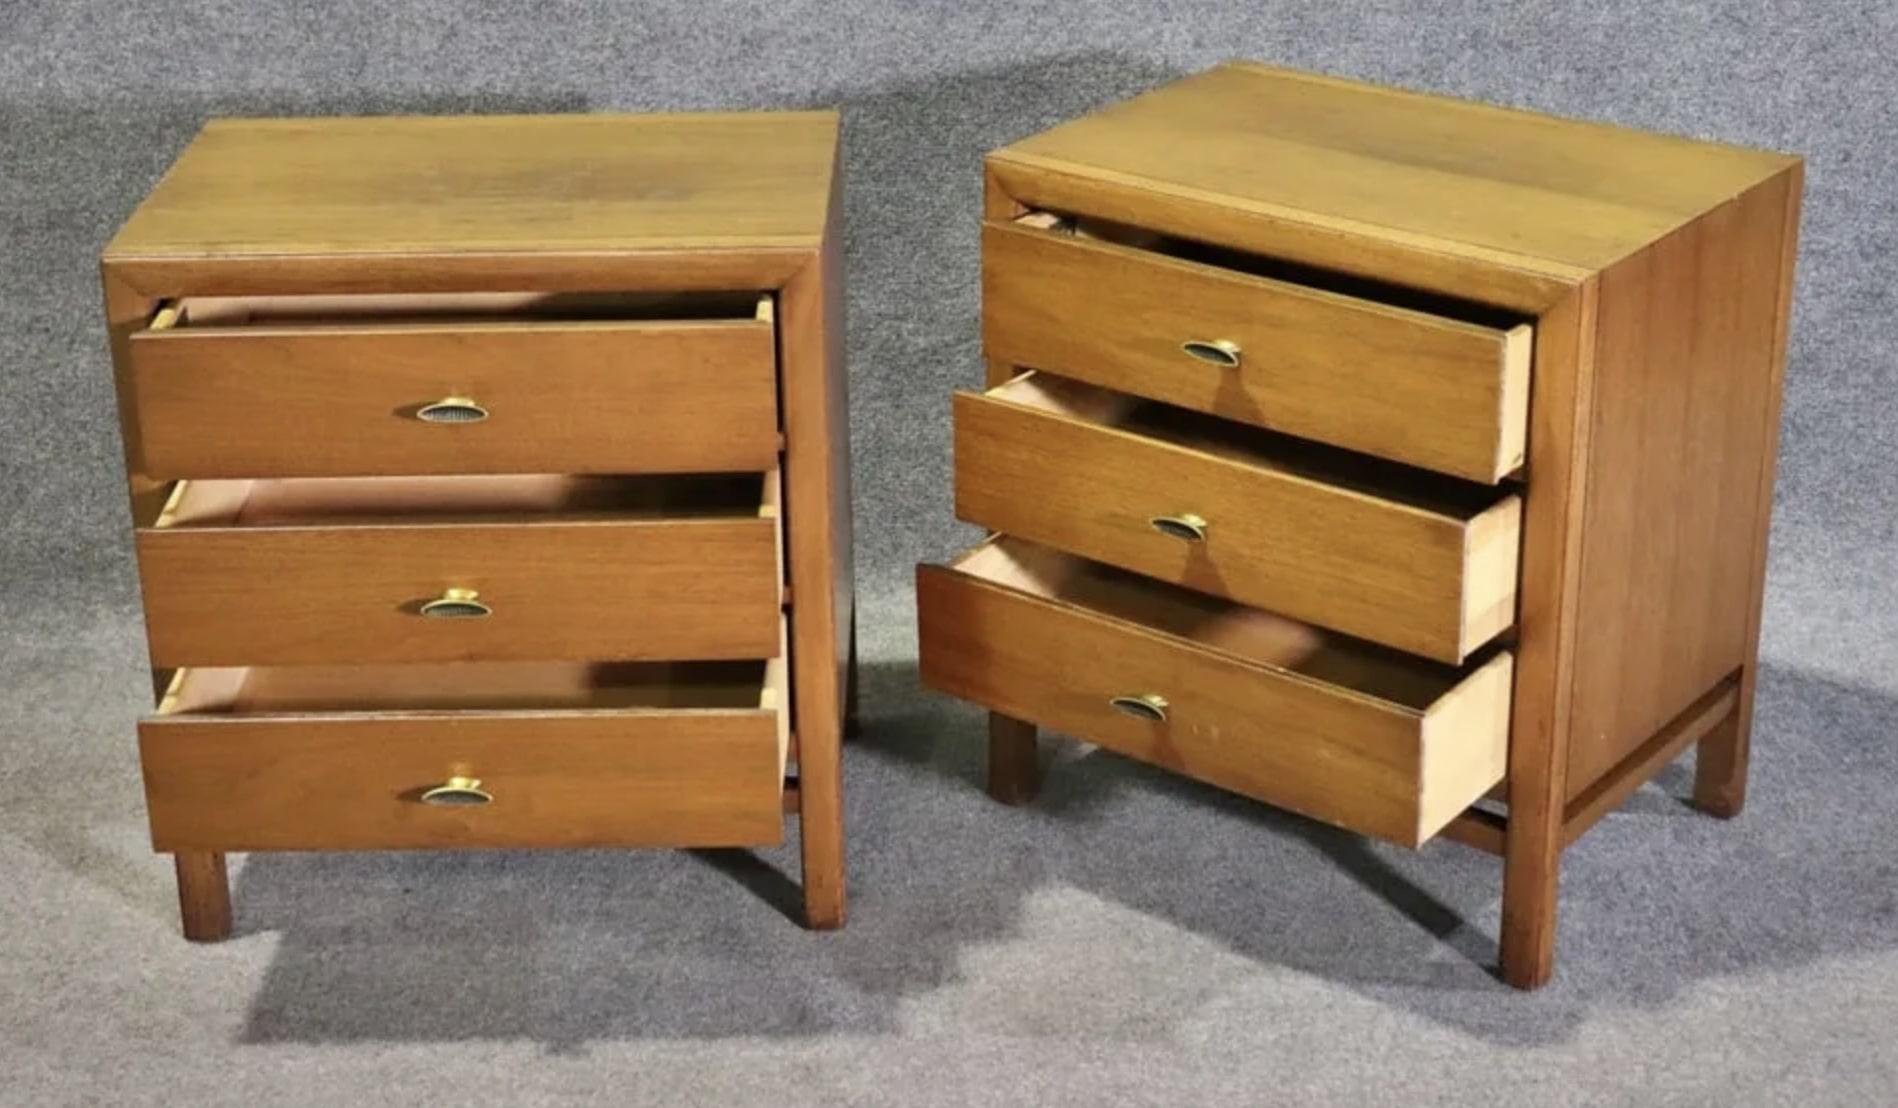 Pair of vintage storage tables with three drawers. Great for living room or bedside use.
Please confirm location NY or NJ